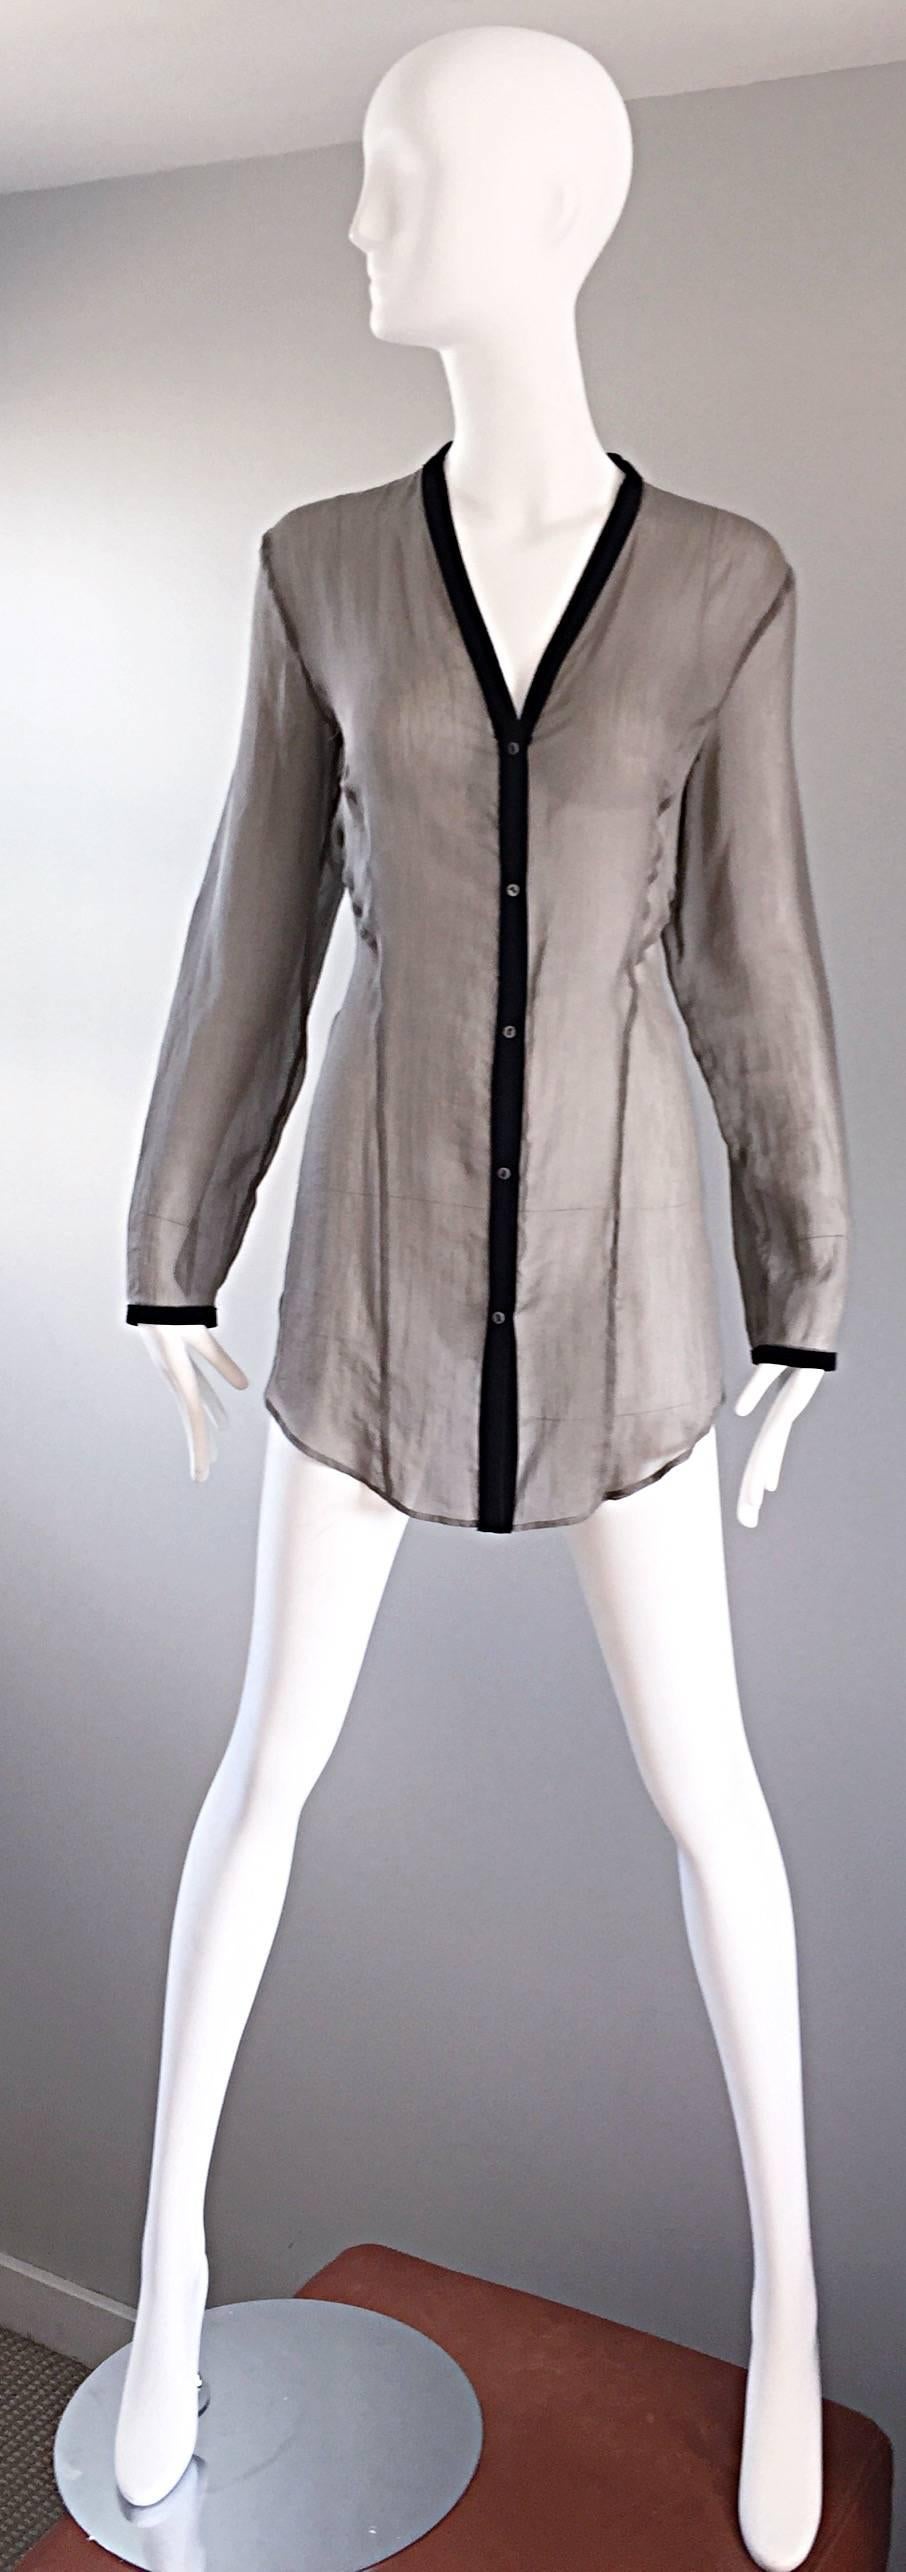 Chic vintage HELMUT LANG early 2000s taupe / gray long sleeve silk chiffon and leather blouse! Features a soft semi sheer silk, with black suede leather trim down the center front, and at each sleeve cuff. Buttons down the bodice and sleeves. Can be